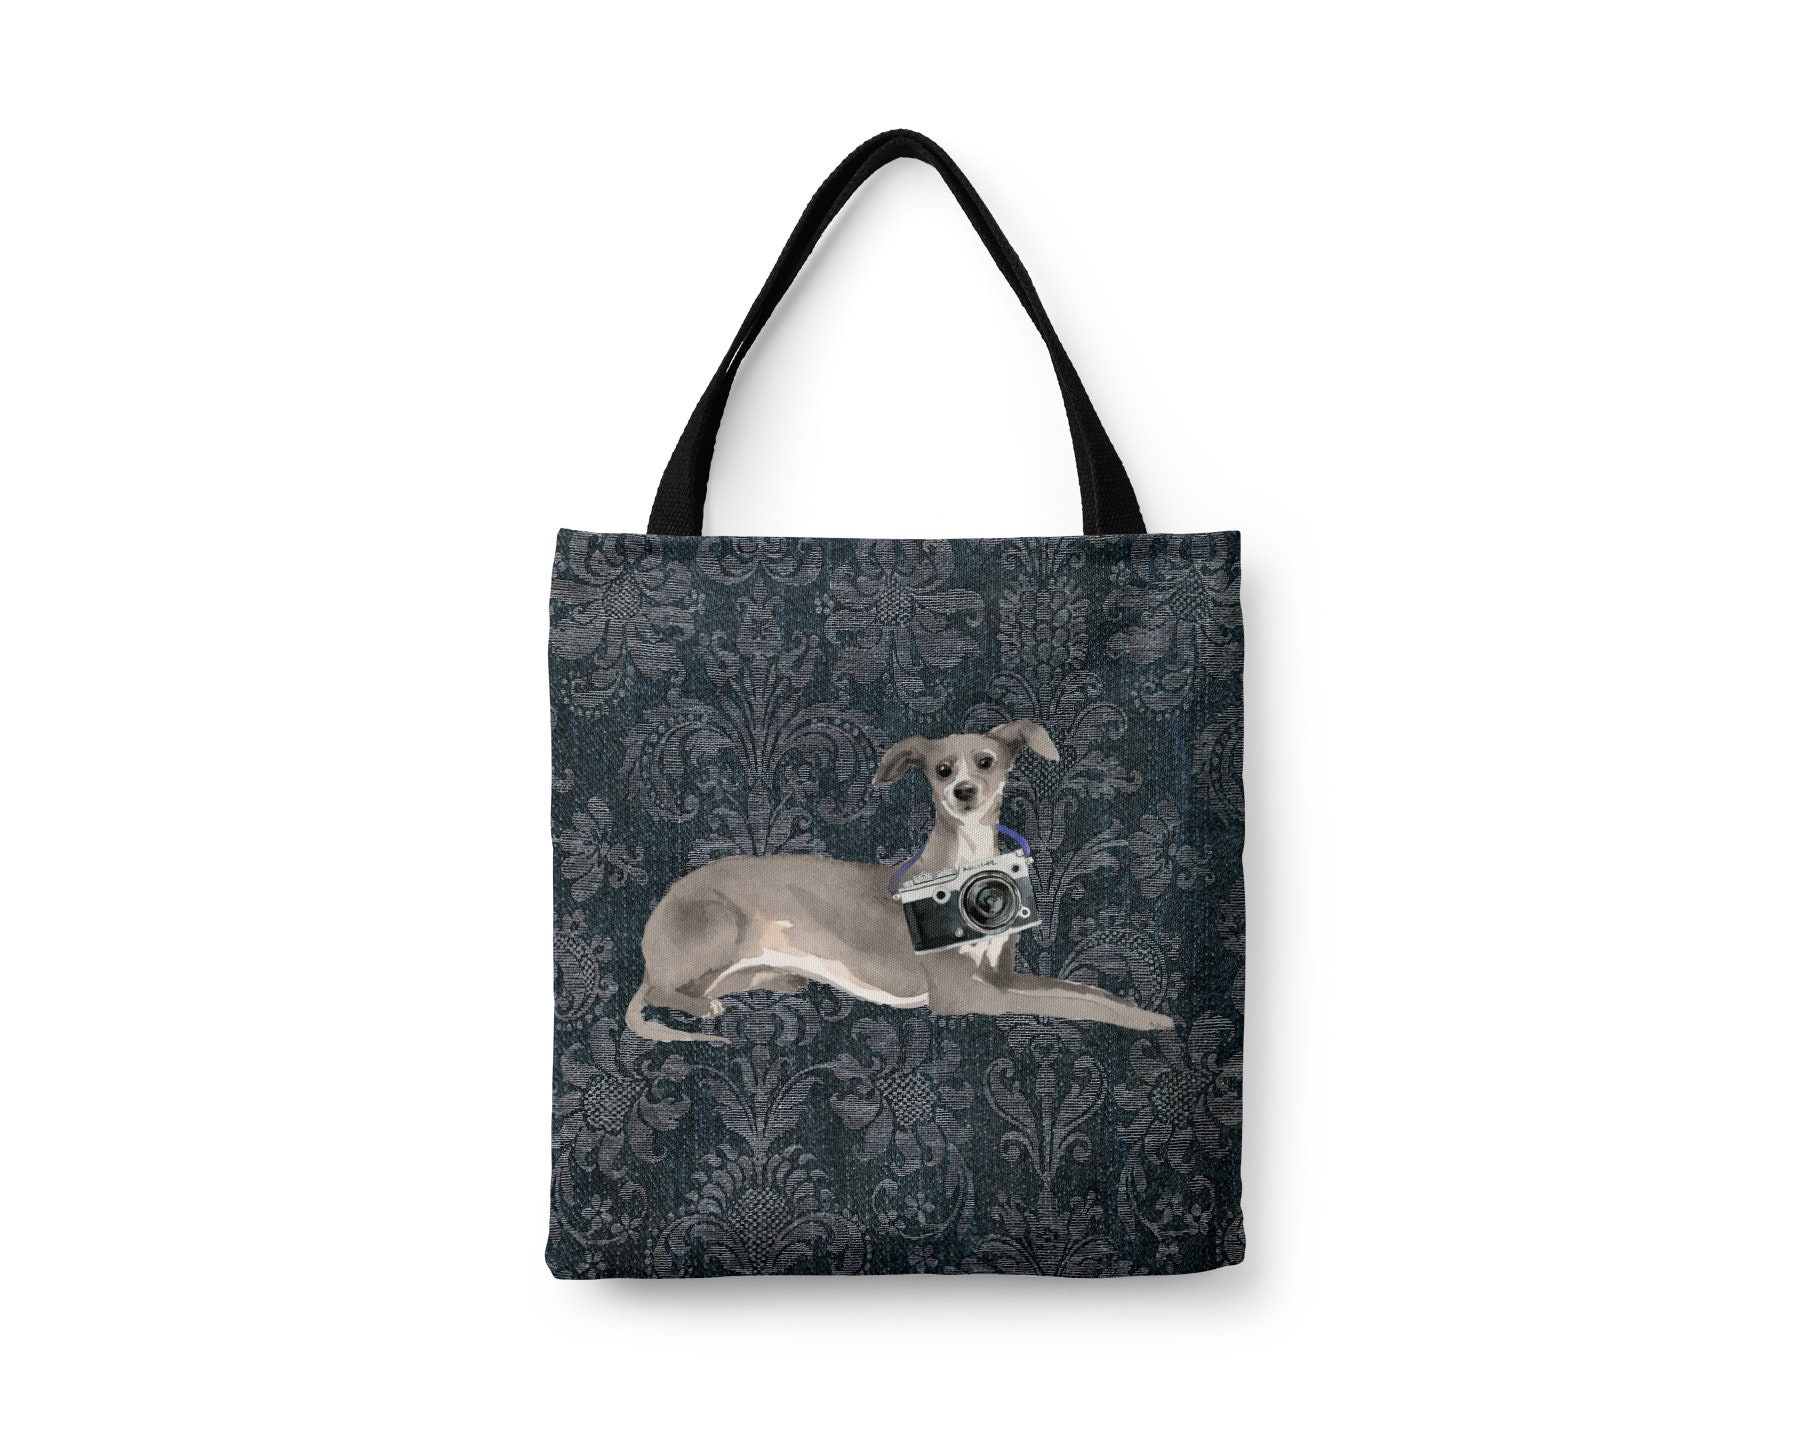 Italian Greyhound Dog Tote Bag Illustrated Dogs & 6 Denim Inspired Styles. All Purpose Ideal For Shopping, Laptop. Iggy Bag